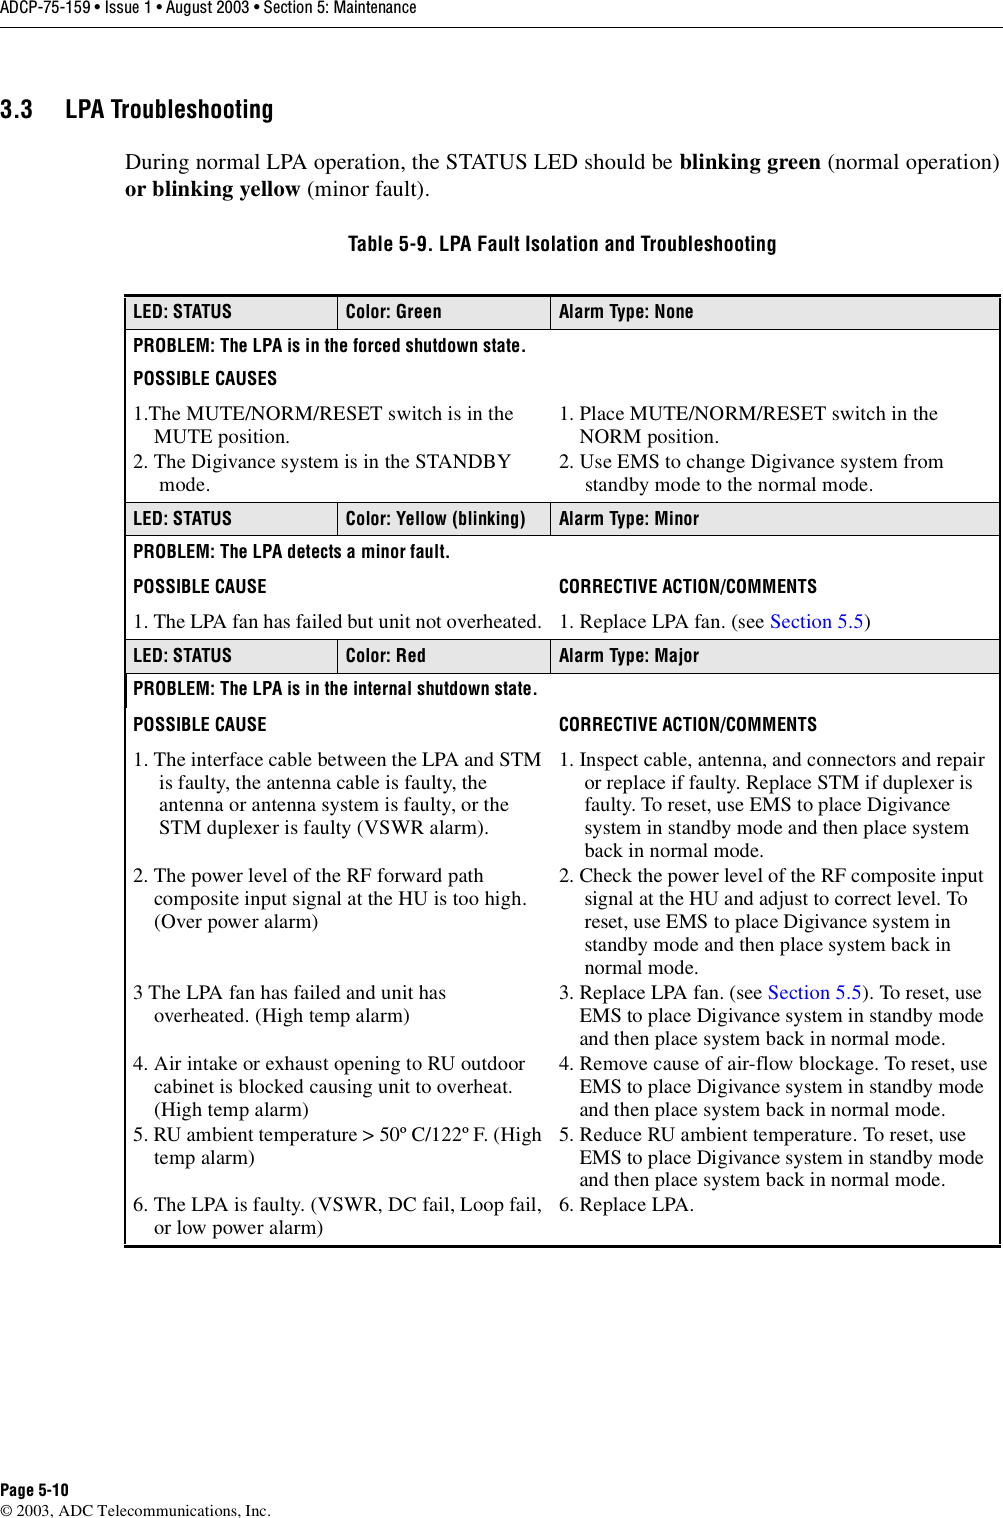 ADCP-75-159 • Issue 1 • August 2003 • Section 5: MaintenancePage 5-10© 2003, ADC Telecommunications, Inc.3.3 LPA TroubleshootingDuring normal LPA operation, the STATUS LED should be blinking green (normal operation)or blinking yellow (minor fault). Table 5-9. LPA Fault Isolation and TroubleshootingLED: STATUS Color: Green Alarm Type: NonePROBLEM: The LPA is in the forced shutdown state.POSSIBLE CAUSES1.The MUTE/NORM/RESET switch is in the    MUTE position. 2. The Digivance system is in the STANDBY     mode. 1. Place MUTE/NORM/RESET switch in the    NORM position. 2. Use EMS to change Digivance system from     standby mode to the normal mode. LED: STATUS Color: Yellow (blinking) Alarm Type: MinorPROBLEM: The LPA detects a minor fault. POSSIBLE CAUSE CORRECTIVE ACTION/COMMENTS1. The LPA fan has failed but unit not overheated. 1. Replace LPA fan. (see Section 5.5)LED: STATUS Color: Red Alarm Type: MajorPROBLEM: The LPA is in the internal shutdown state.POSSIBLE CAUSE CORRECTIVE ACTION/COMMENTS1. The interface cable between the LPA and STM     is faulty, the antenna cable is faulty, the     antenna or antenna system is faulty, or the     STM duplexer is faulty (VSWR alarm).2. The power level of the RF forward path     composite input signal at the HU is too high.    (Over power alarm)3 The LPA fan has failed and unit has     overheated. (High temp alarm)4. Air intake or exhaust opening to RU outdoor    cabinet is blocked causing unit to overheat.    (High temp alarm)5. RU ambient temperature &gt; 50º C/122º F. (High    temp alarm)6. The LPA is faulty. (VSWR, DC fail, Loop fail,    or low power alarm)1. Inspect cable, antenna, and connectors and repair     or replace if faulty. Replace STM if duplexer is     faulty. To reset, use EMS to place Digivance      system in standby mode and then place system     back in normal mode. 2. Check the power level of the RF composite input     signal at the HU and adjust to correct level. To     reset, use EMS to place Digivance system in     standby mode and then place system back in      normal mode. 3. Replace LPA fan. (see Section 5.5). To reset, use    EMS to place Digivance system in standby mode    and then place system back in normal mode. 4. Remove cause of air-flow blockage. To reset, use    EMS to place Digivance system in standby mode    and then place system back in normal mode. 5. Reduce RU ambient temperature. To reset, use    EMS to place Digivance system in standby mode    and then place system back in normal mode. 6. Replace LPA. 